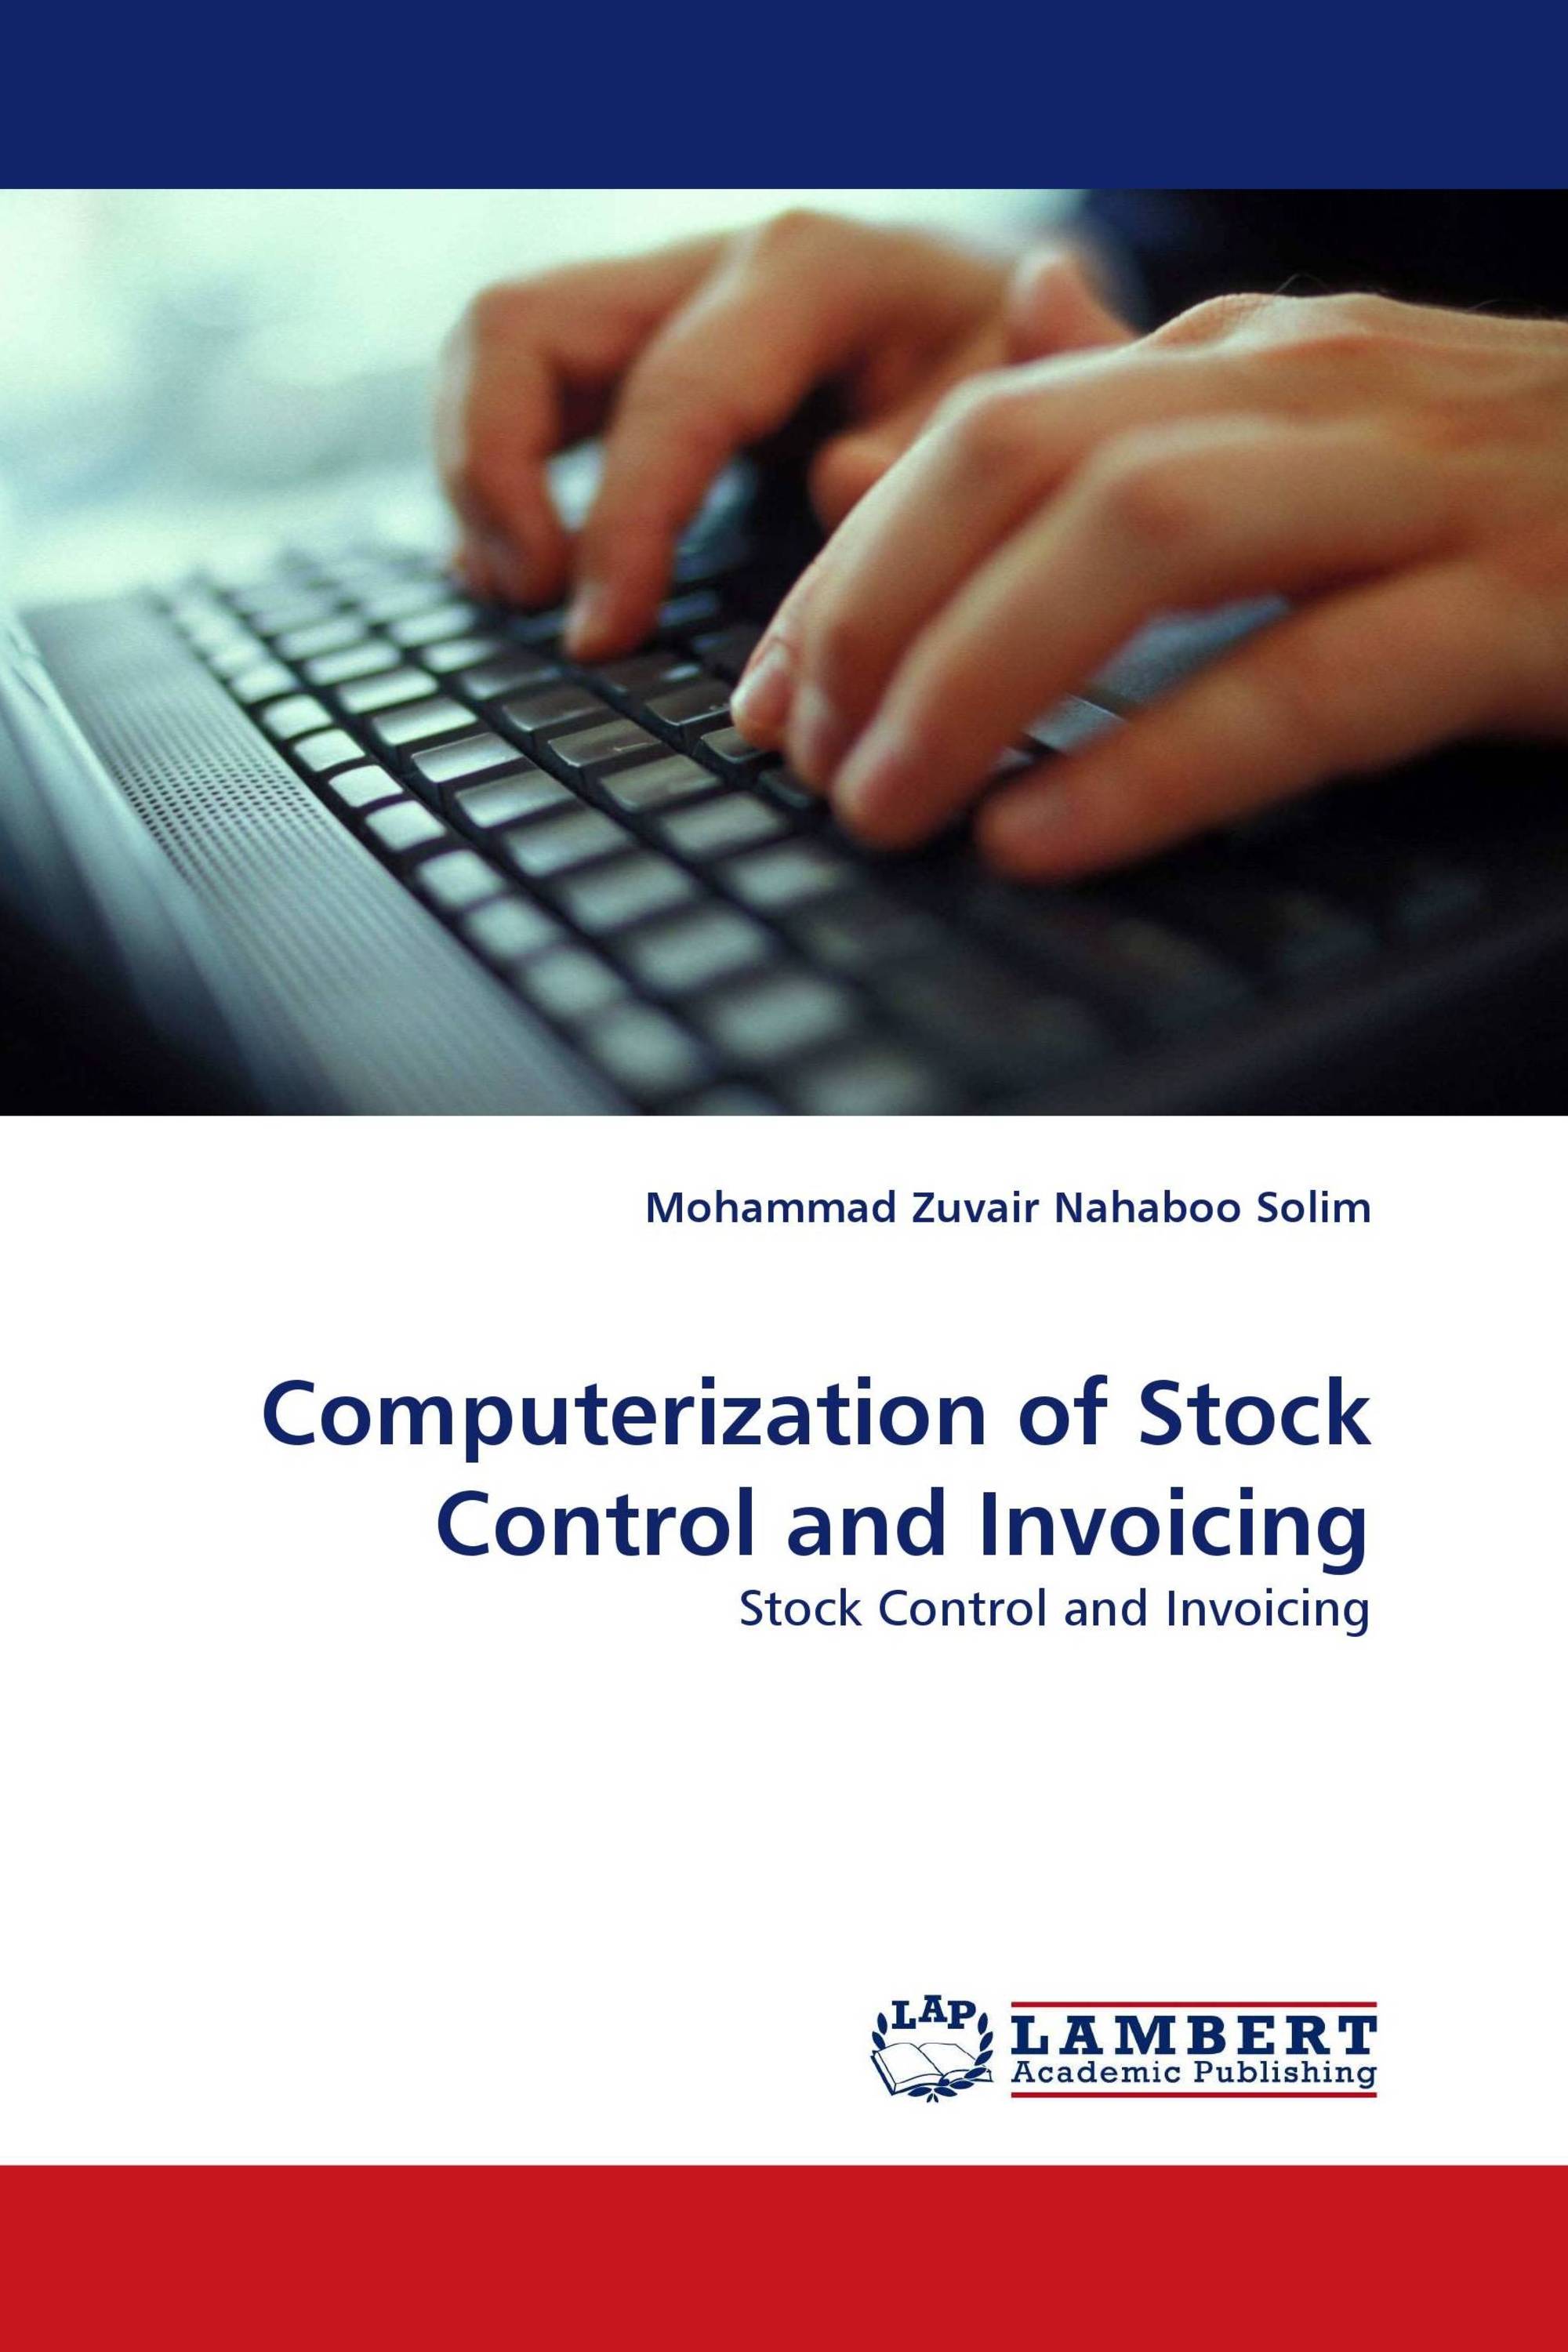 Computerization of Stock Control and Invoicing